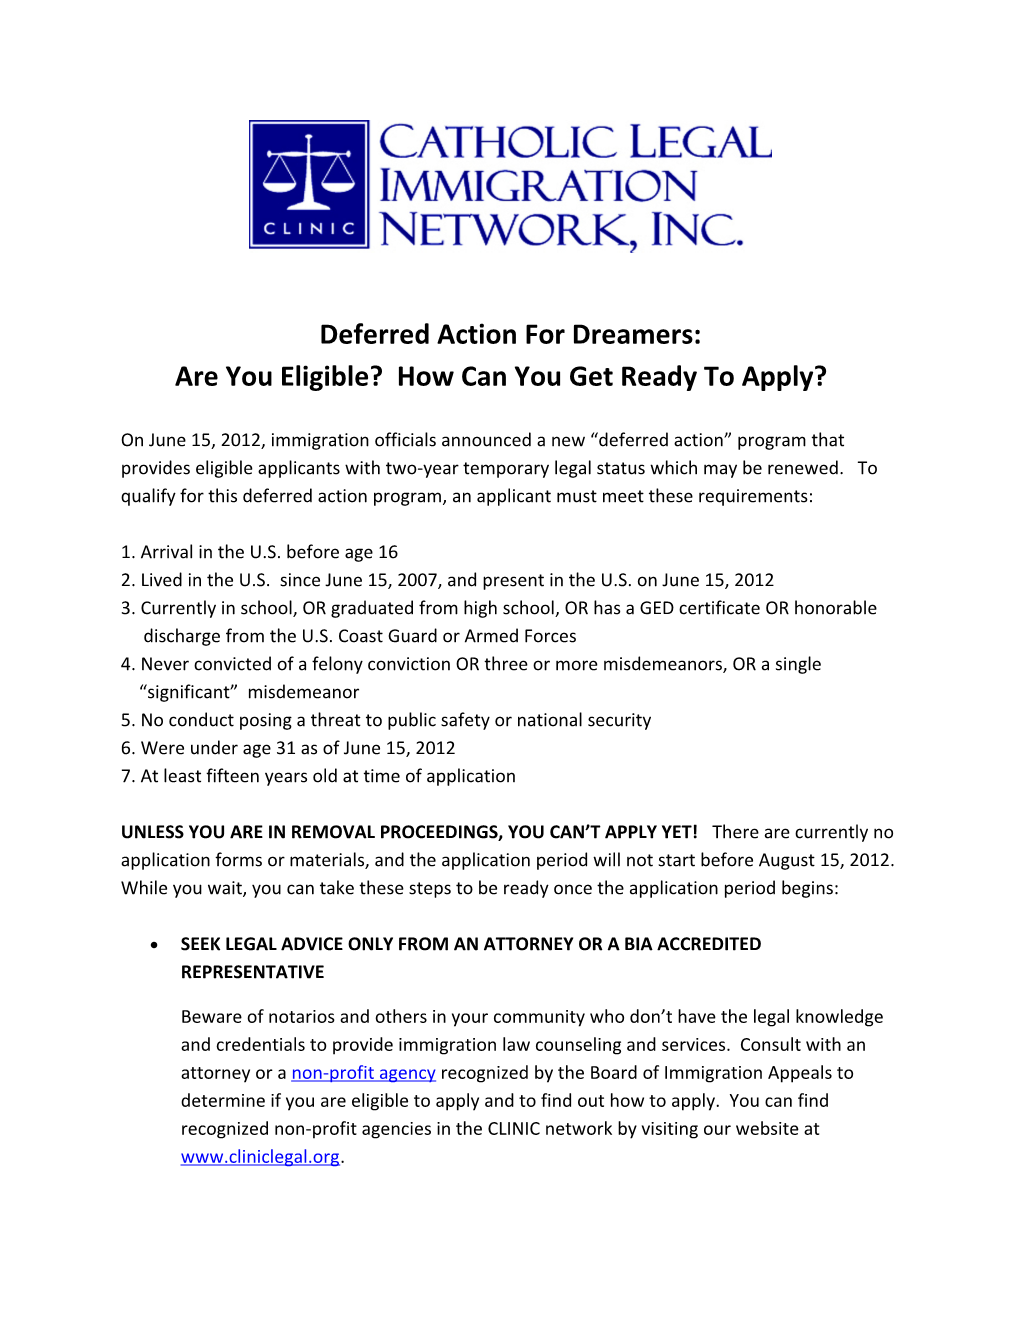 Deferred Action for Dreamers